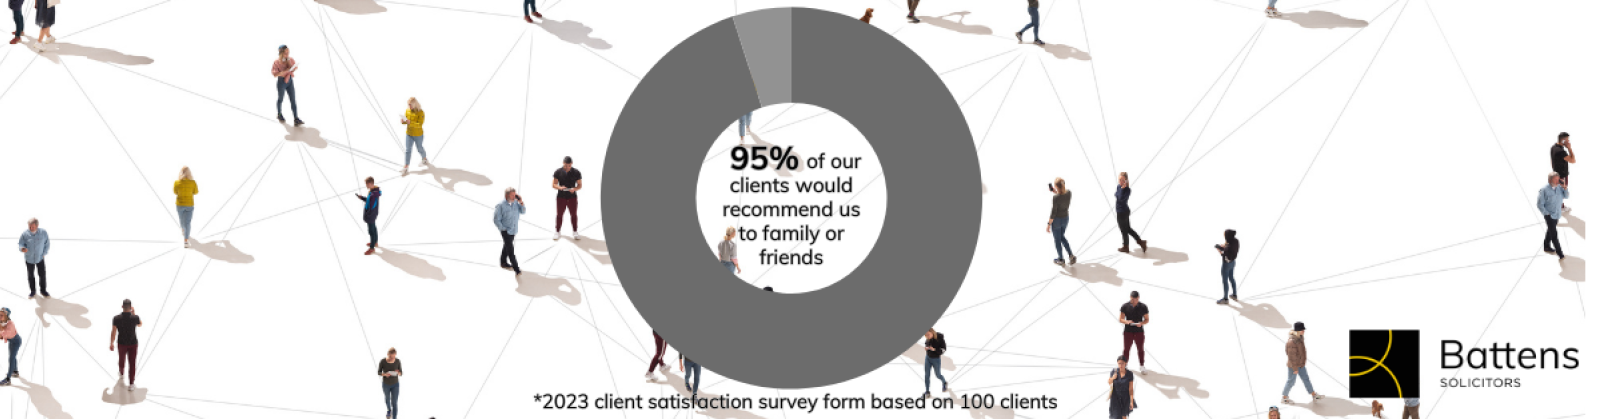 95% of Battens Solicitors clients would recommend them